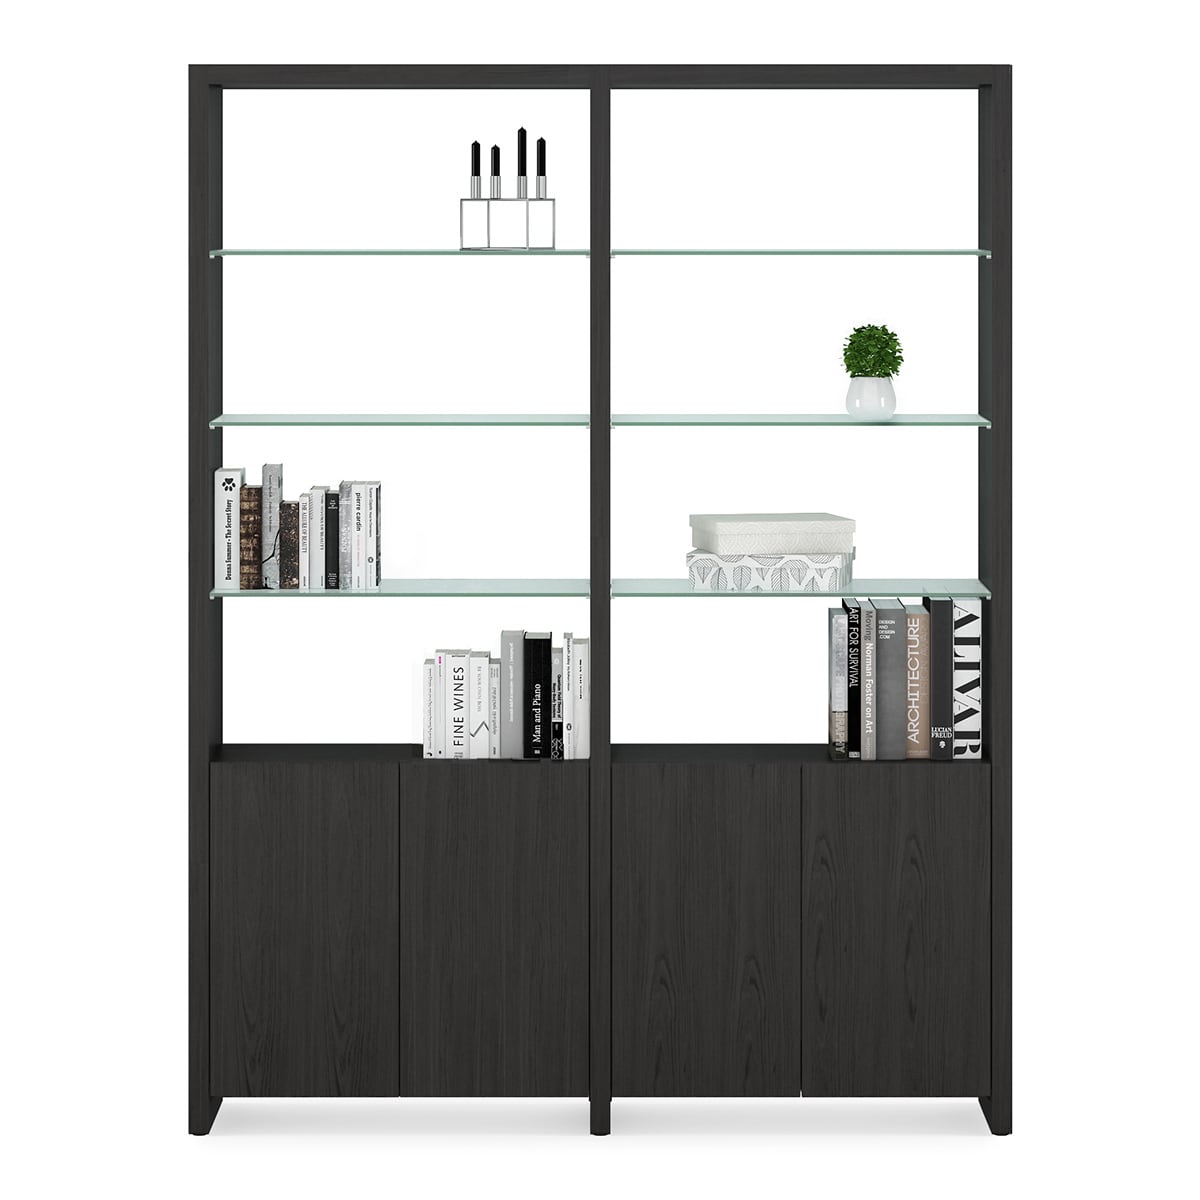 BDI Linea 580022 2 Shelf System 64" Wide (Charcoal Stained Ash)